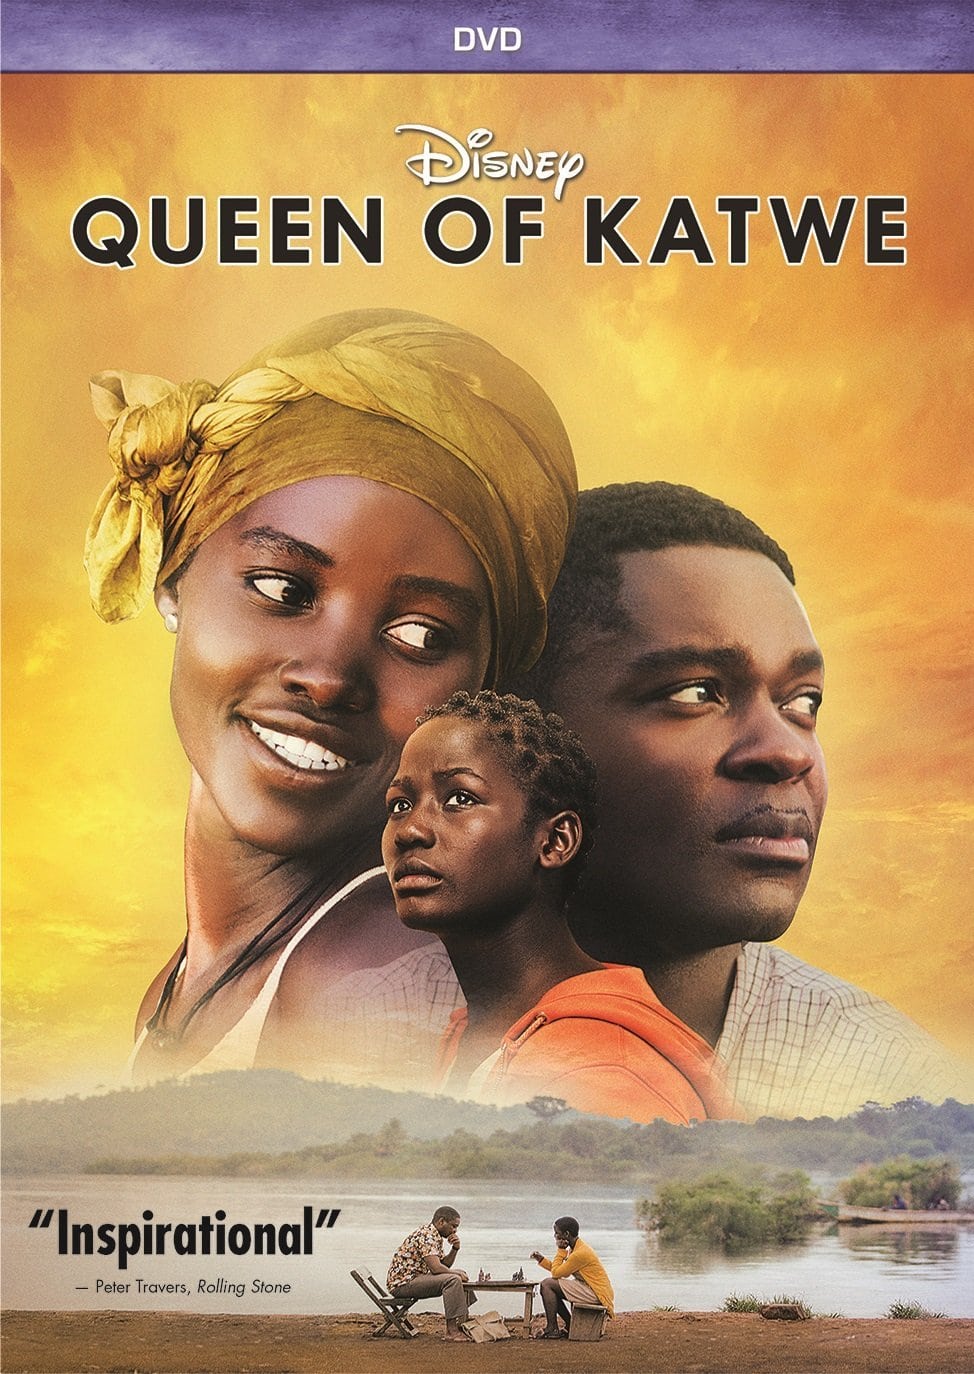 Queen of Katwe, a clean inspiring movie on Netflix